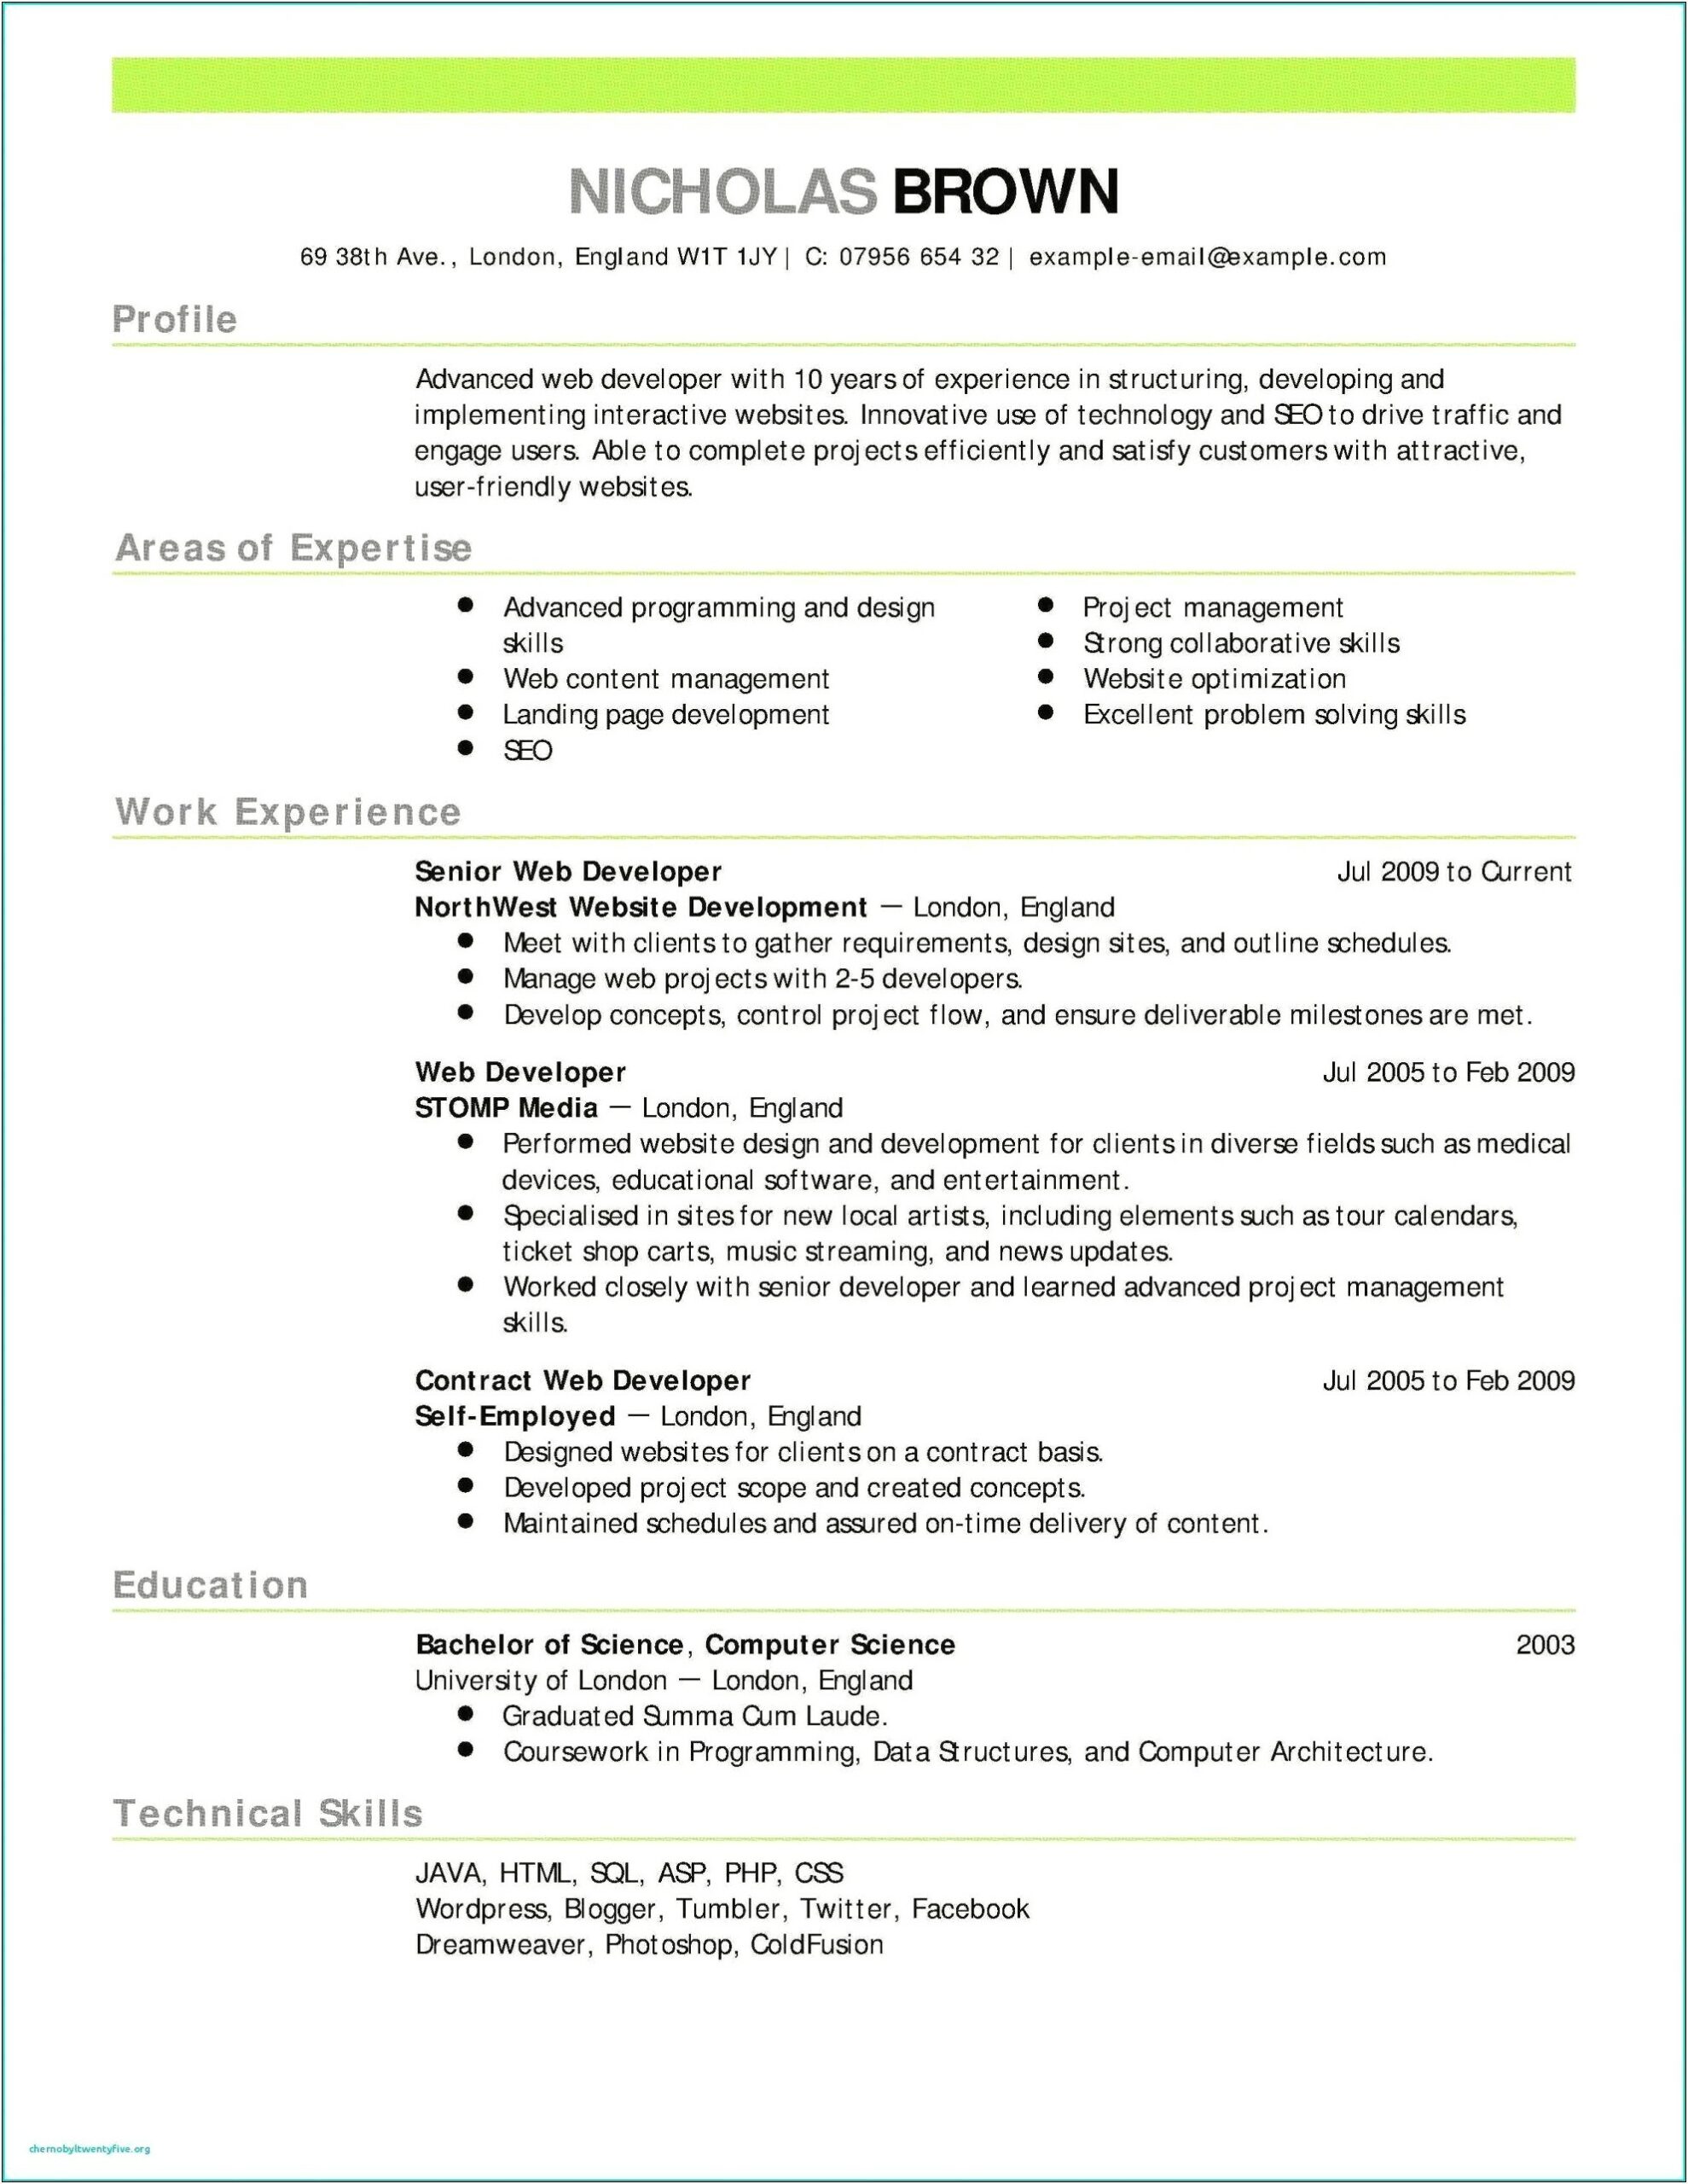 Sample Resume With Self Employed Experience